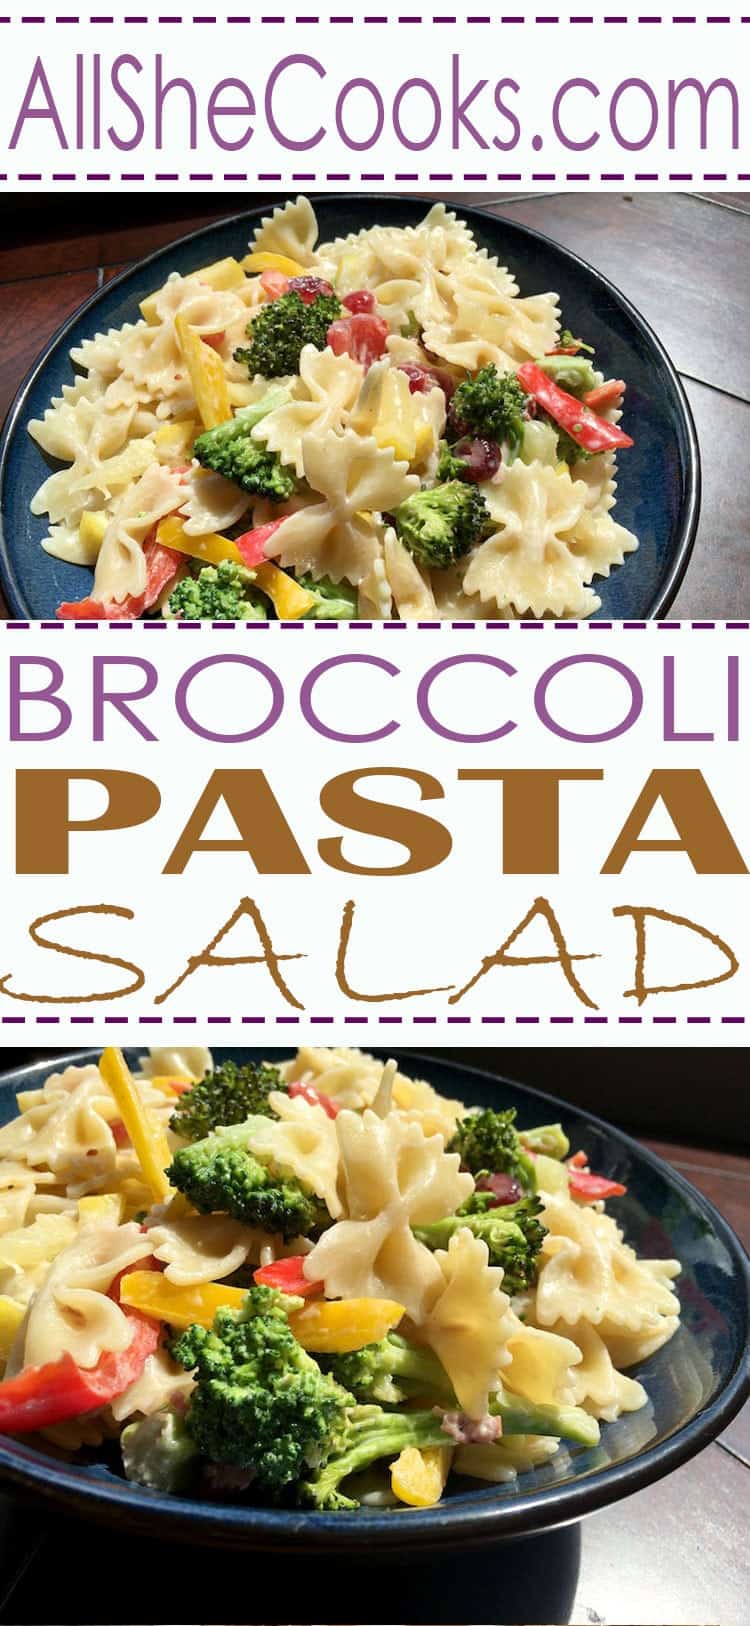 Perfect pasta salad to bring to a bbq, tailgate, potluck or block party. This broccoli pasta salad has just the right flavor to be a winner with everyone!